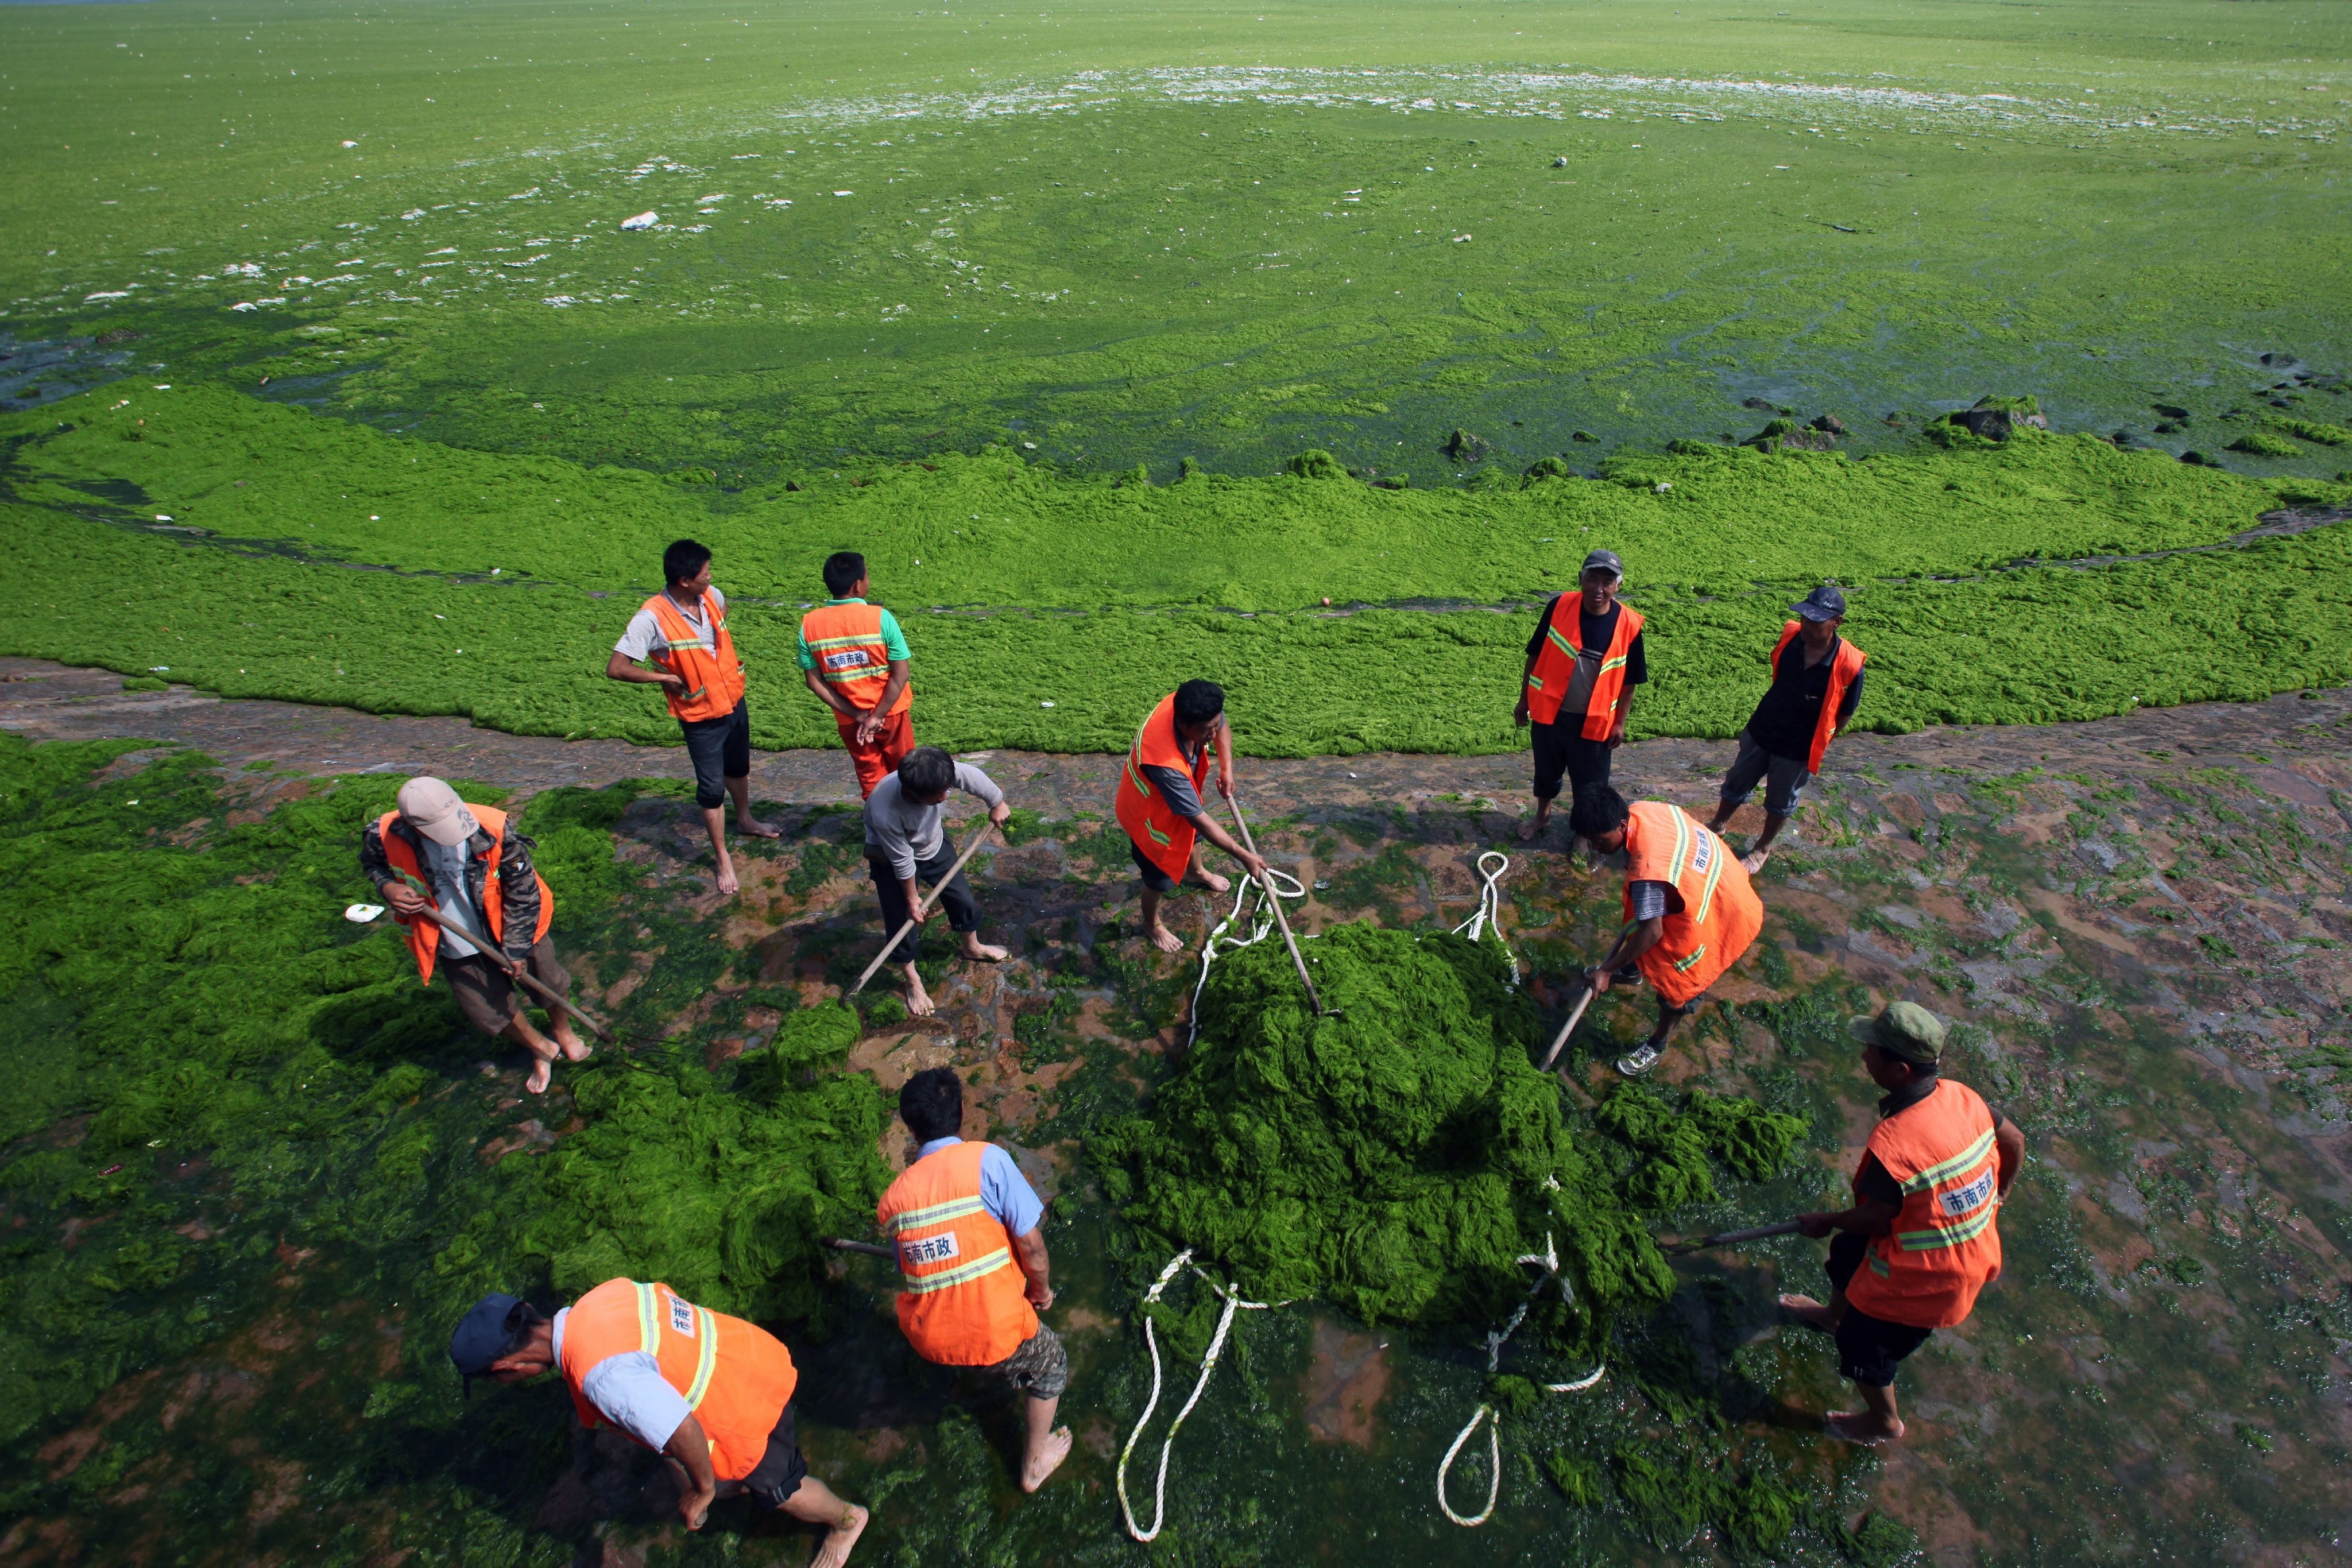 Workers clear a seaweed-covered bay in the coastal city of Qingdao, in Shandong province. The seaweed grows quickly when marine water becomes excessively enriched with minerals and nutrients due to pollution. Photo: EPA